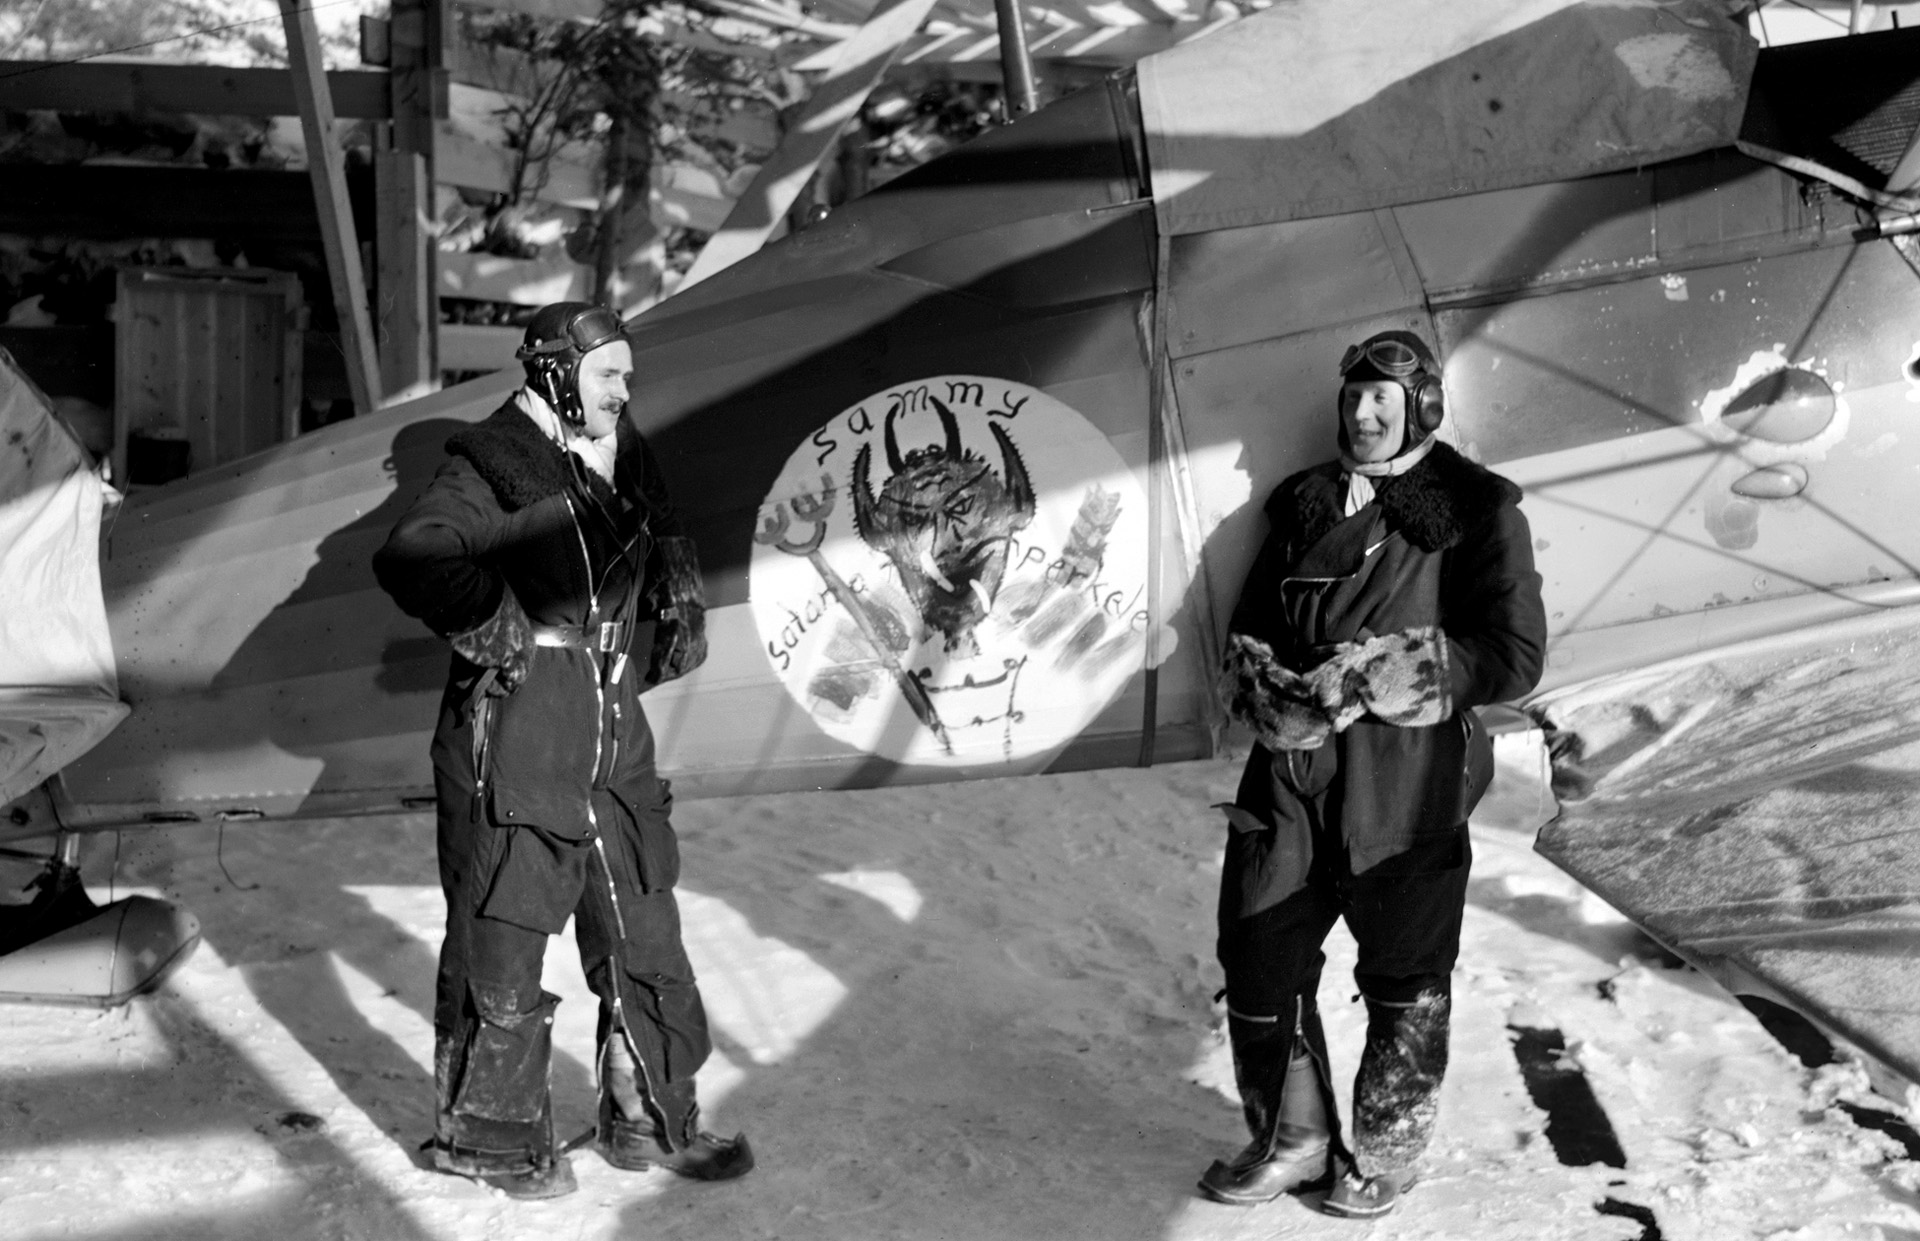 The Finns had help from volunteer Swedish airmen. Here, two Swedes, clad in heavy flight gear, stand beside a British-built Gloster Gladiator. The wide variety of aircraft from different nations caused supply and maintenance problems for the Finns.